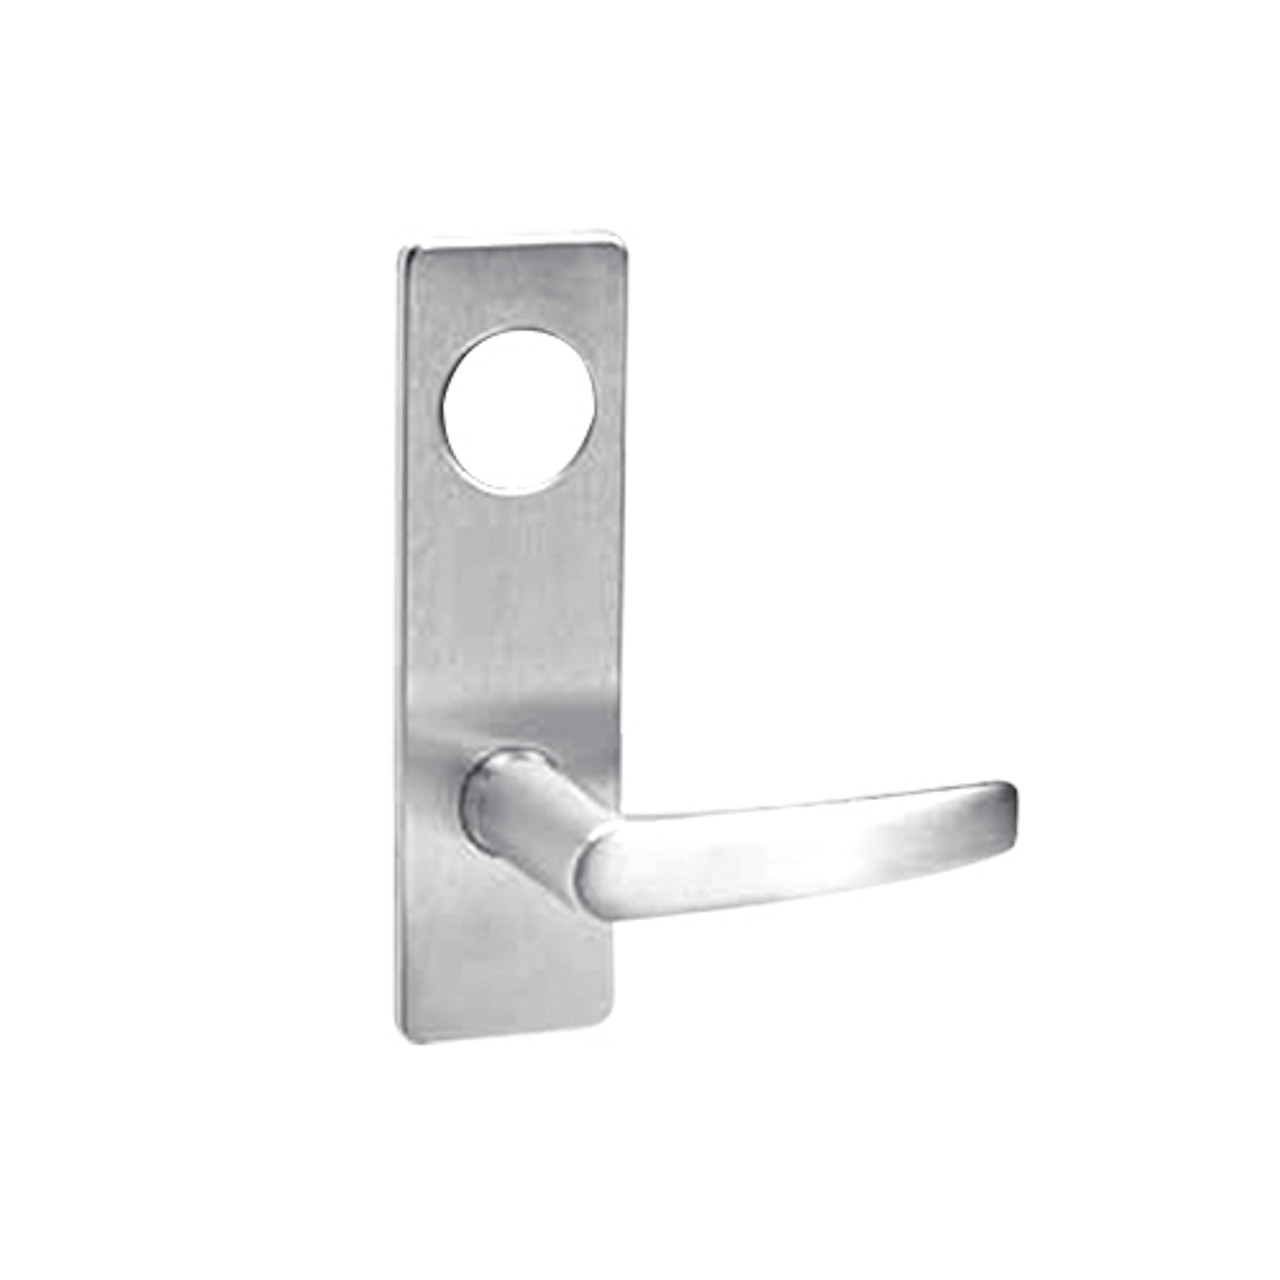 ML2042-ASM-629-CL7 Corbin Russwin ML2000 Series IC 7-Pin Less Core Mortise Entrance Locksets with Armstrong Lever in Bright Stainless Steel